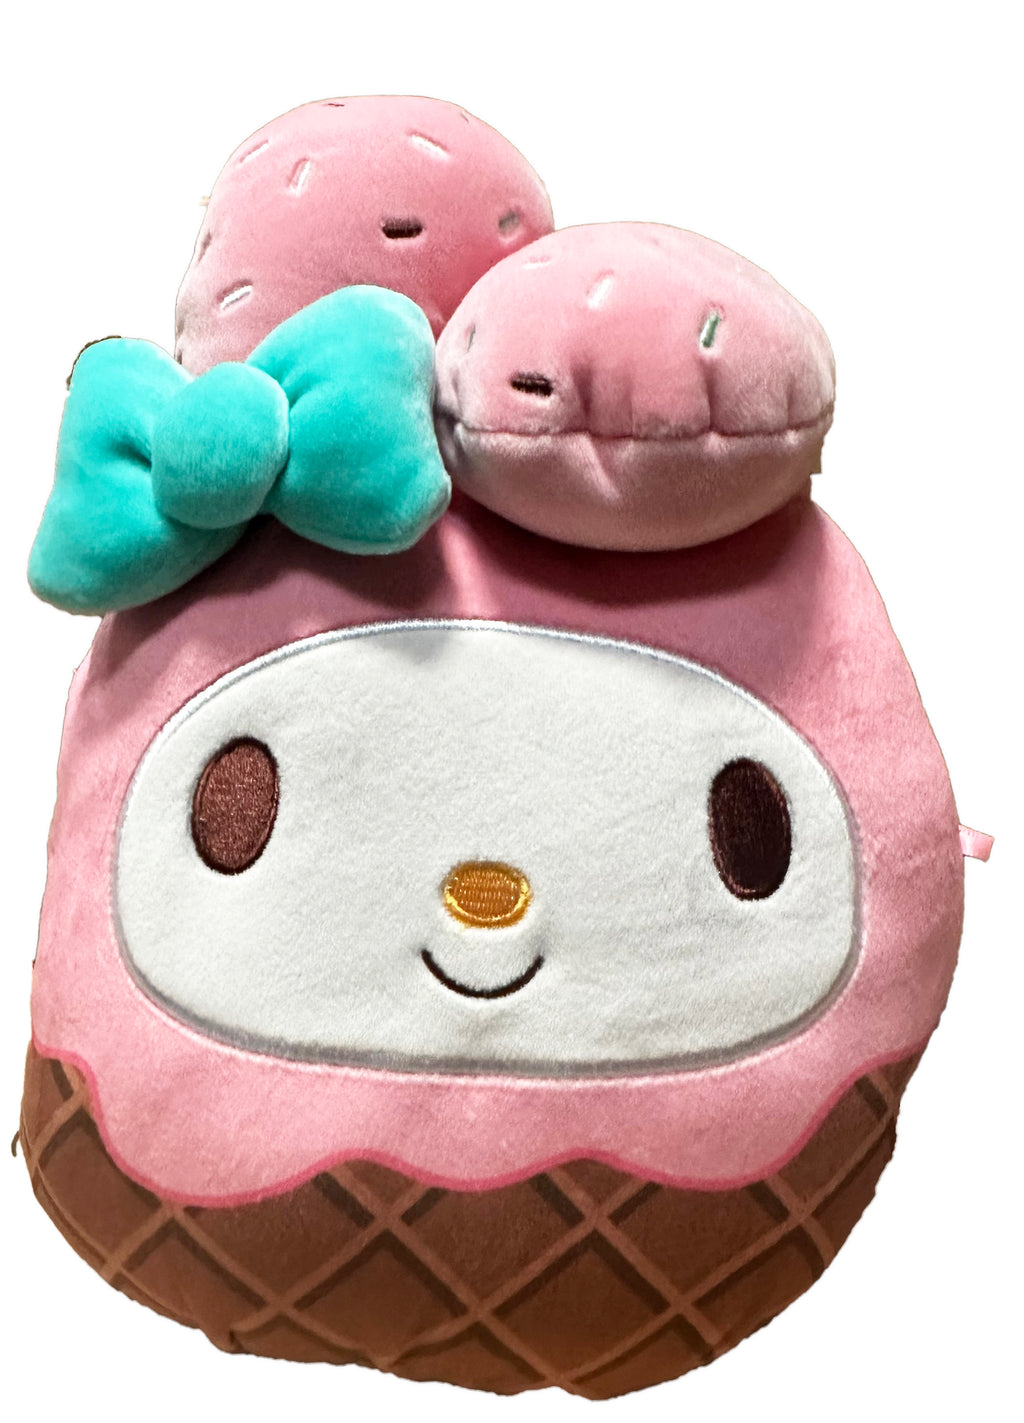 8'' SANRIO MY MELODY - PINK WITH TEAL BOW